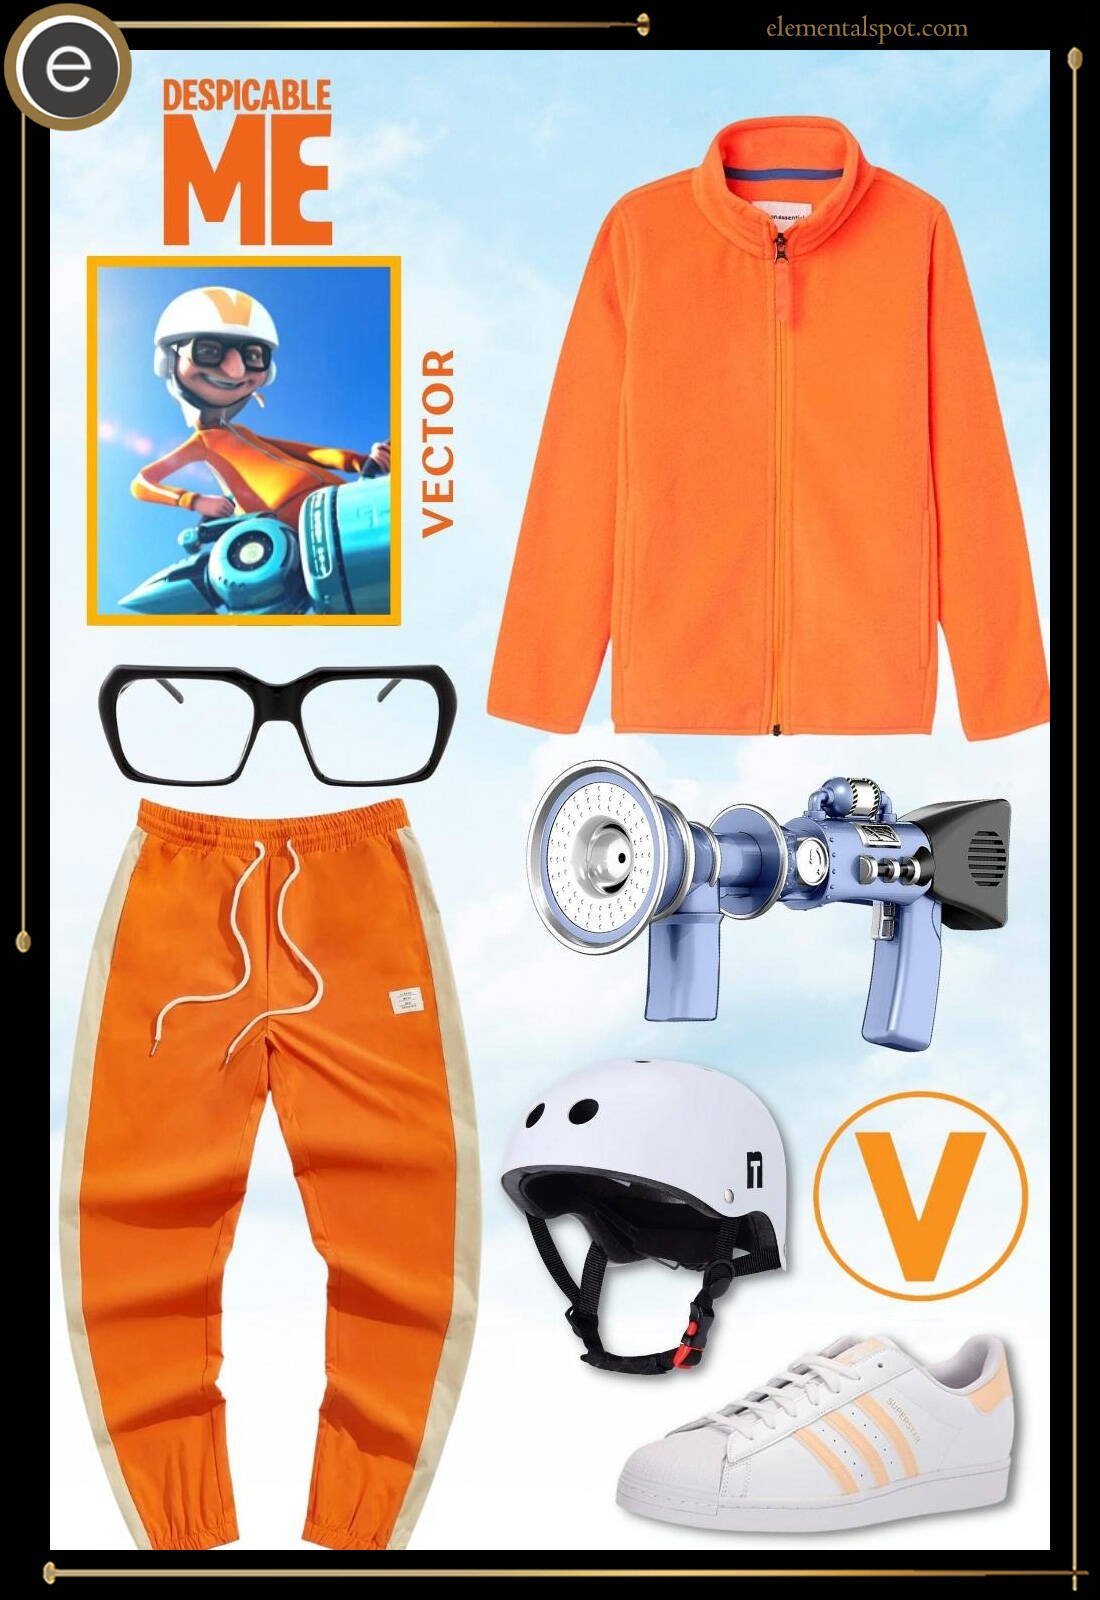 vector-despicable-me-costume-outfit-inspo